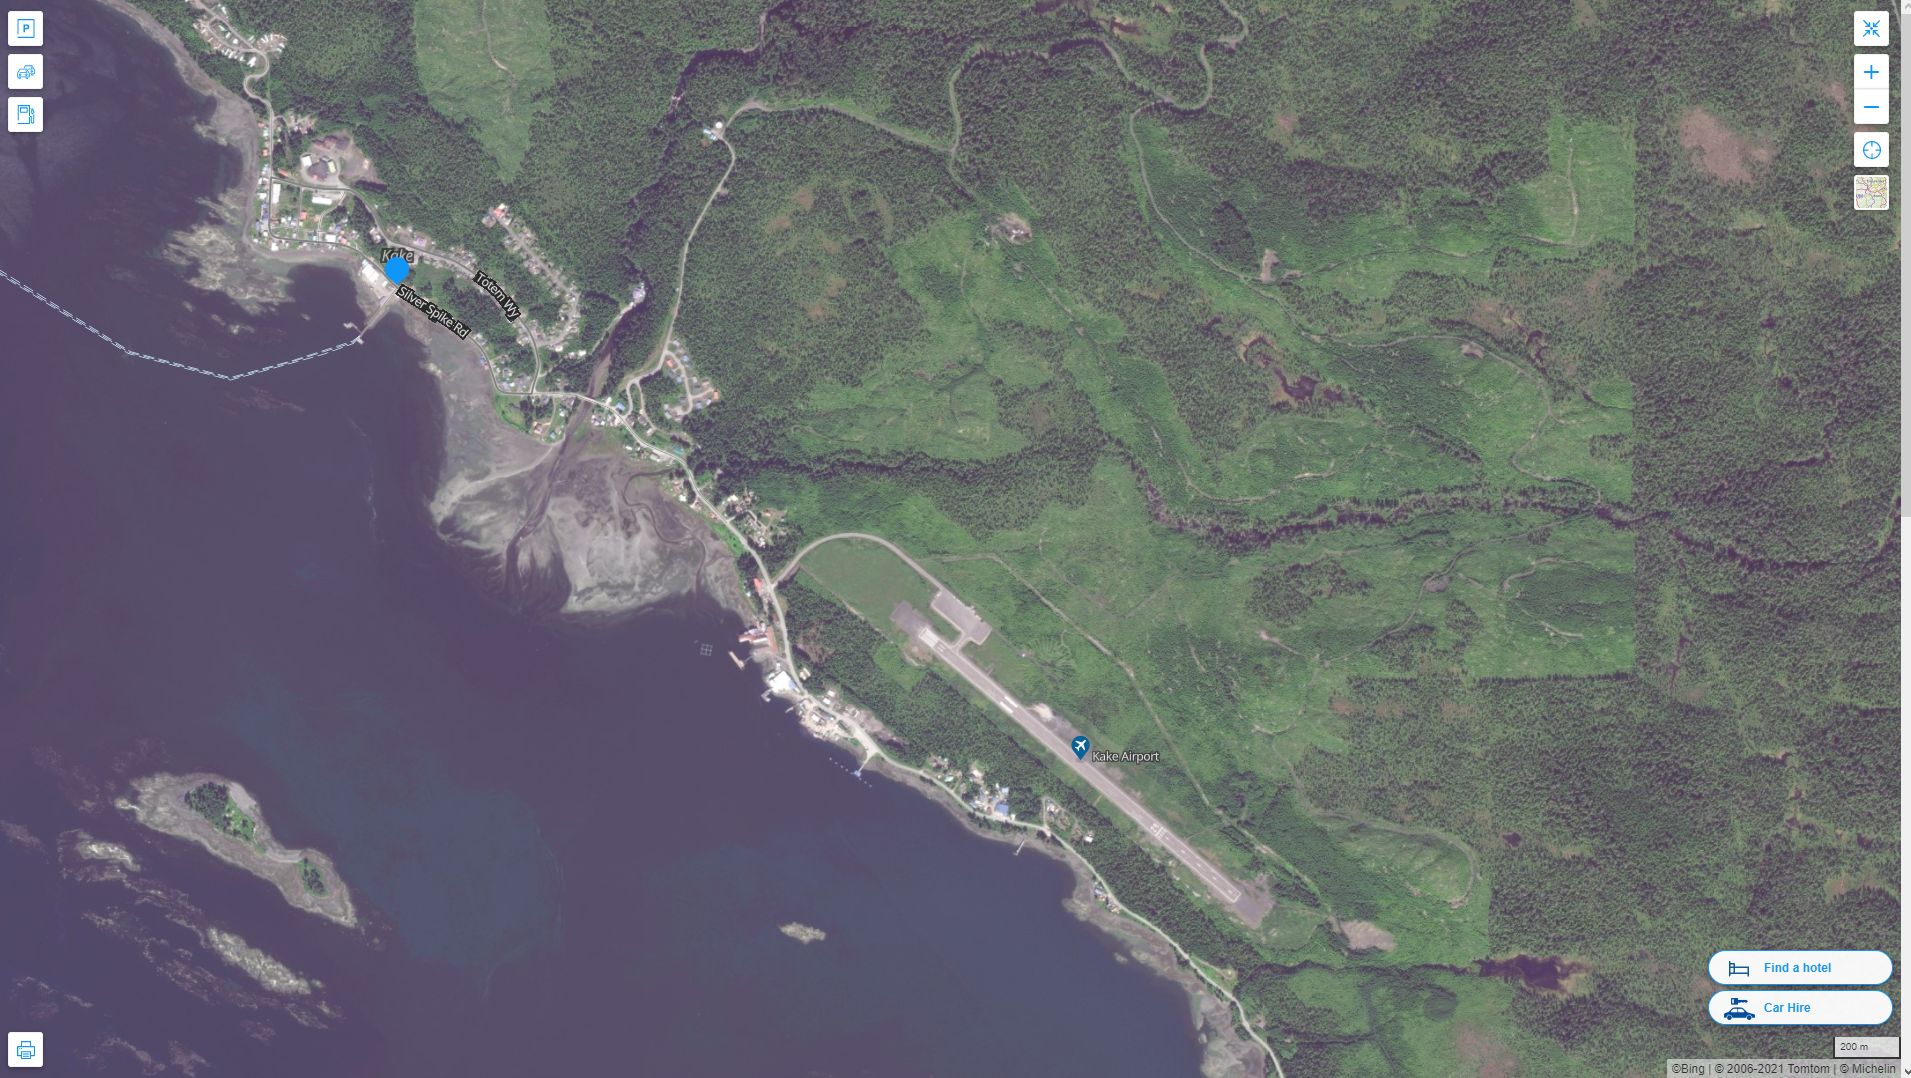 Kake Alaska Highway and Road Map with Satellite View